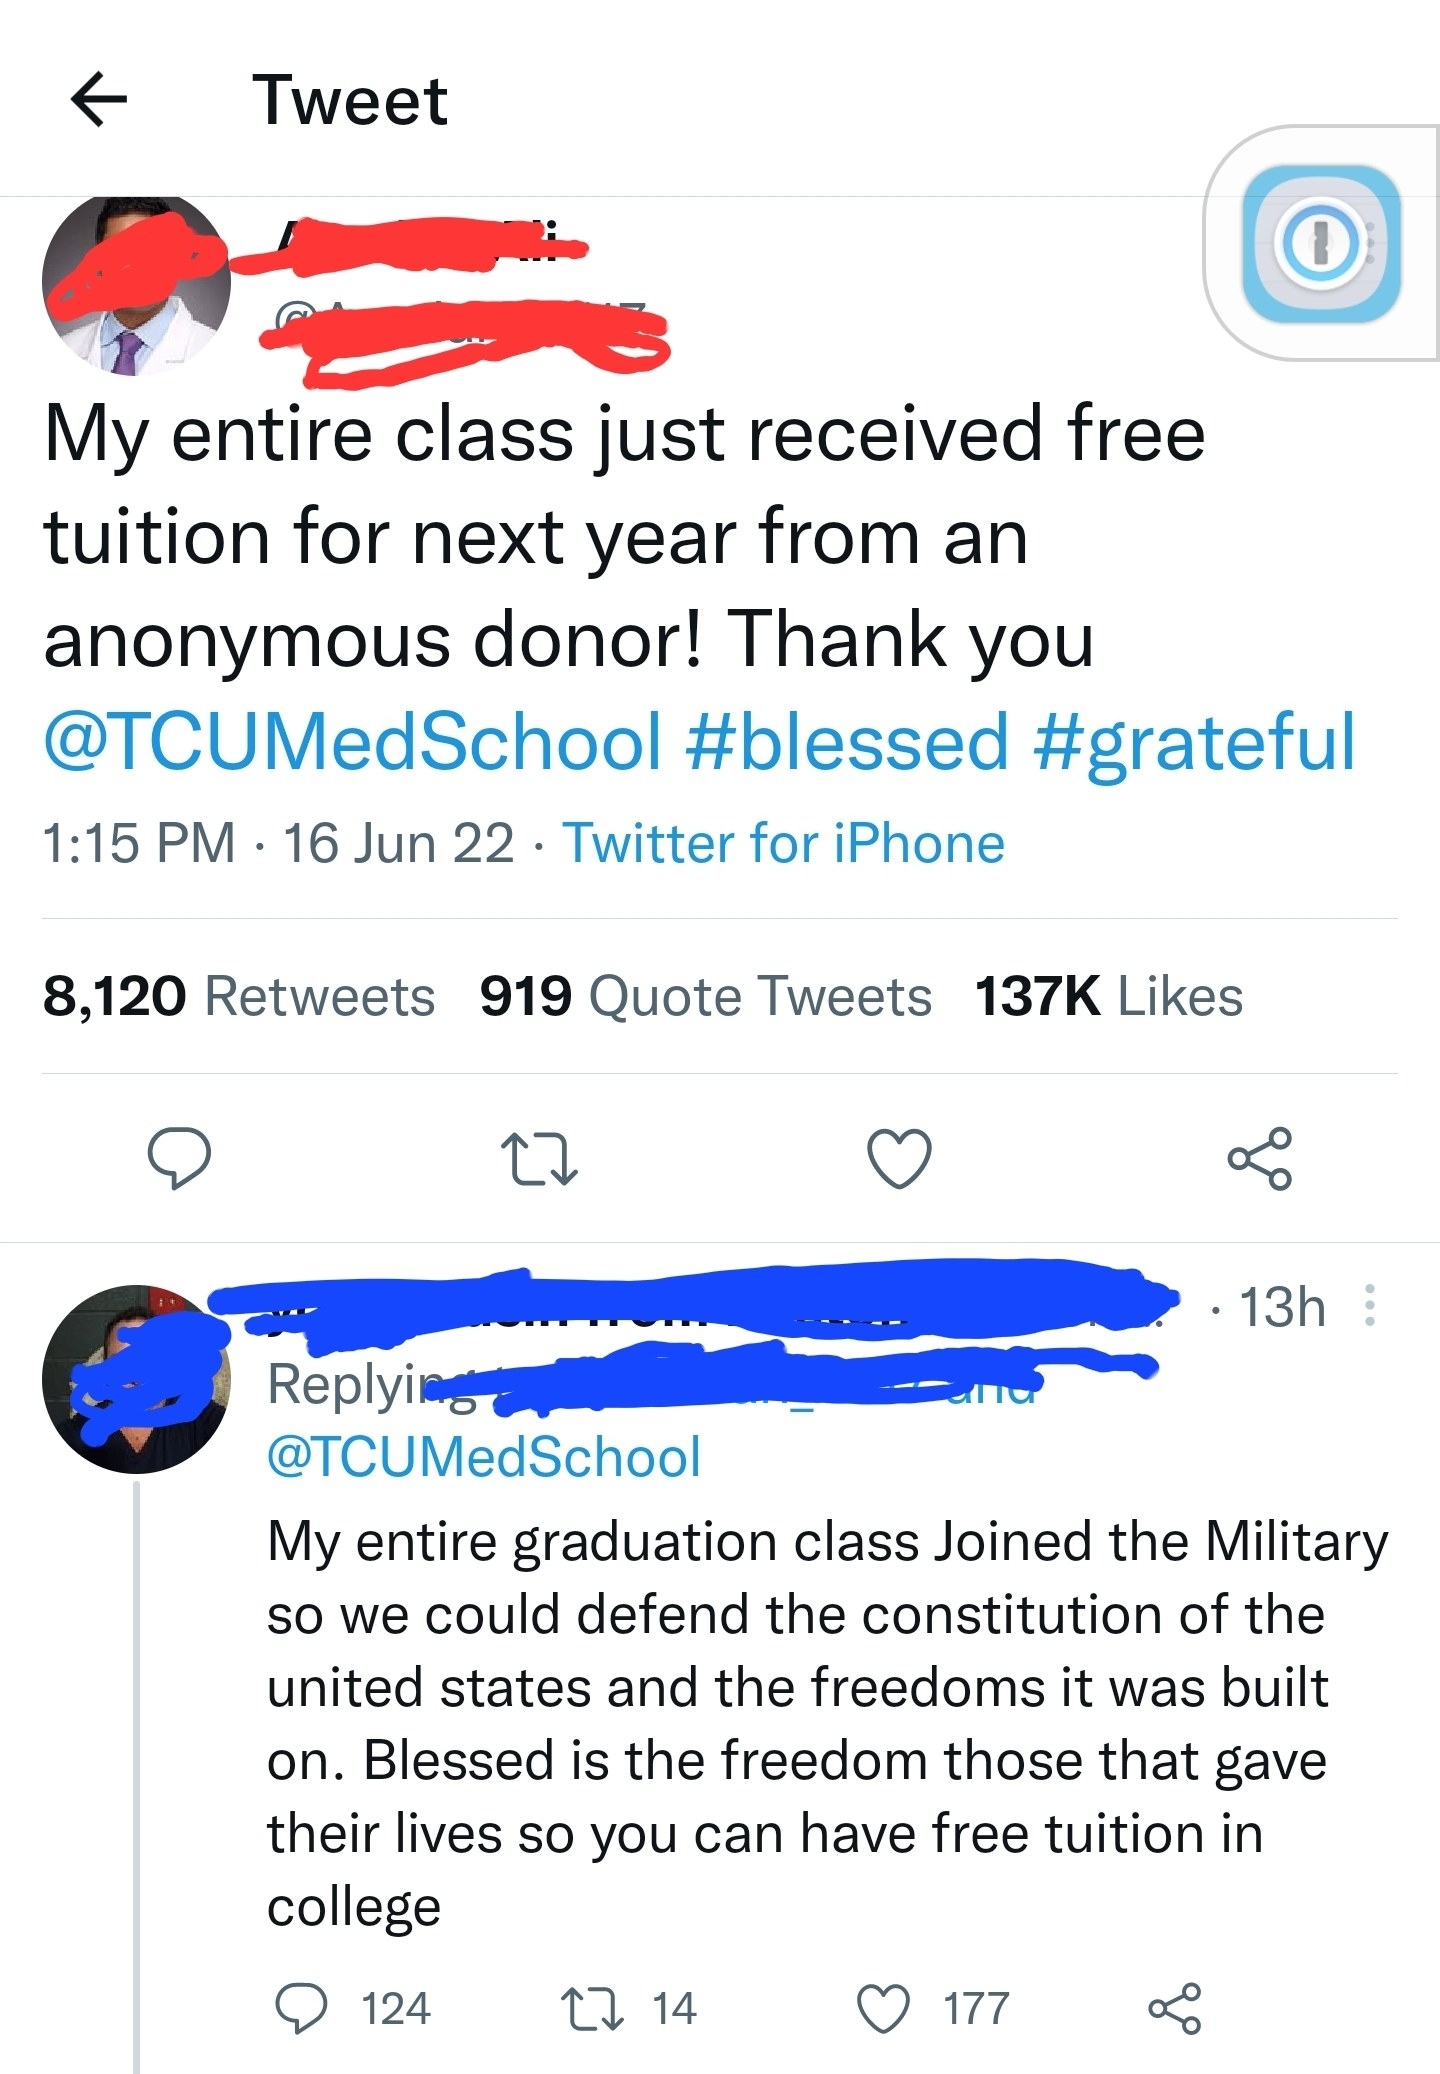 Person says their entire class got free tuition for a year because of a donor, and response is &quot;My entire graduation class joined the military so we could defend the Constitution and the freedoms it was built on&quot;